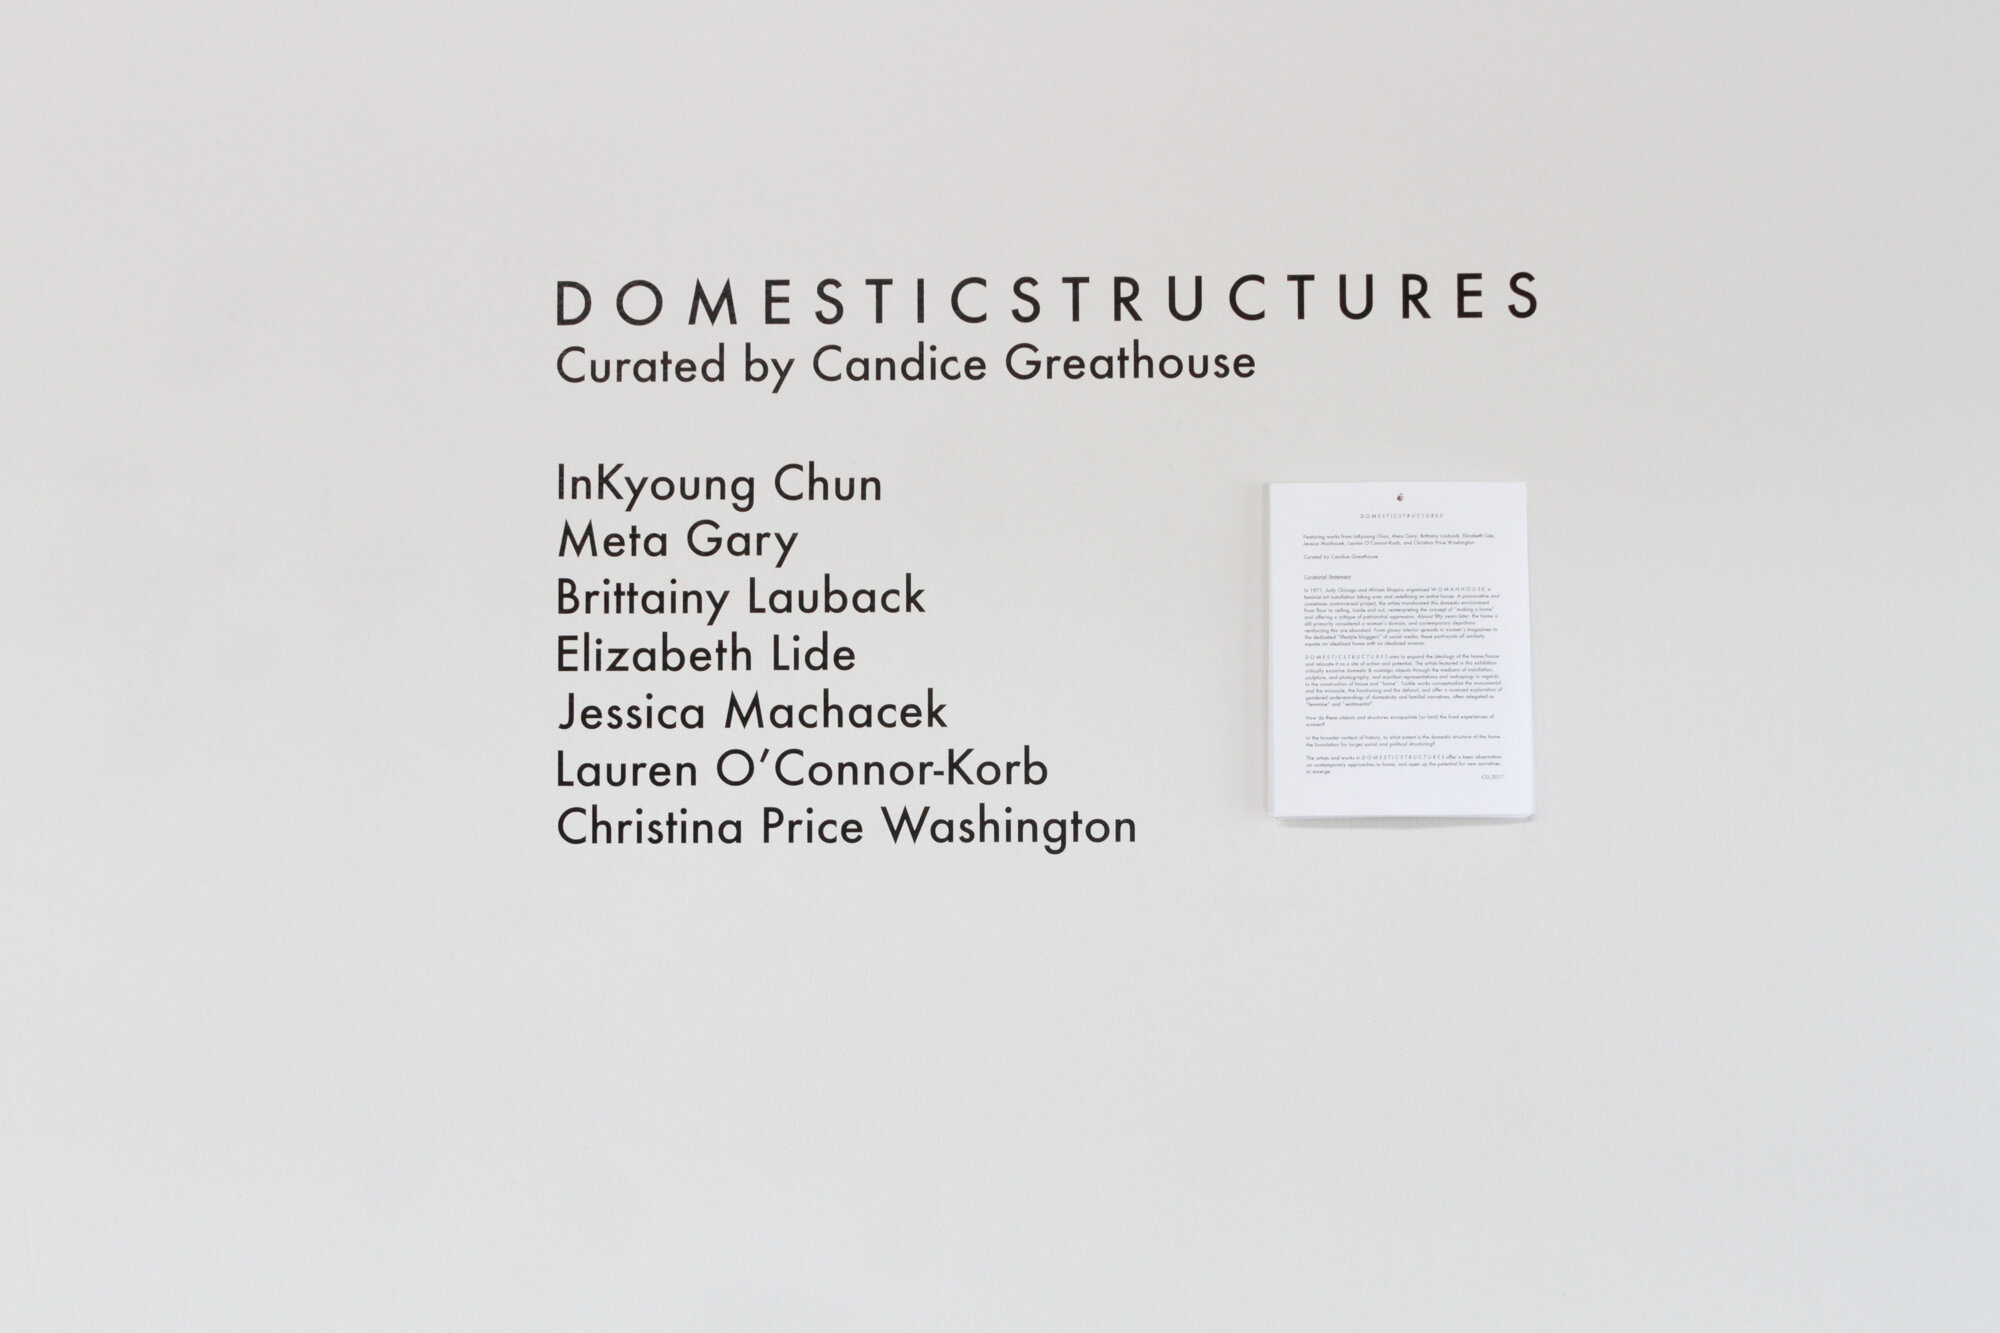 DOMESTIC-STRUCTURES-1.jpg